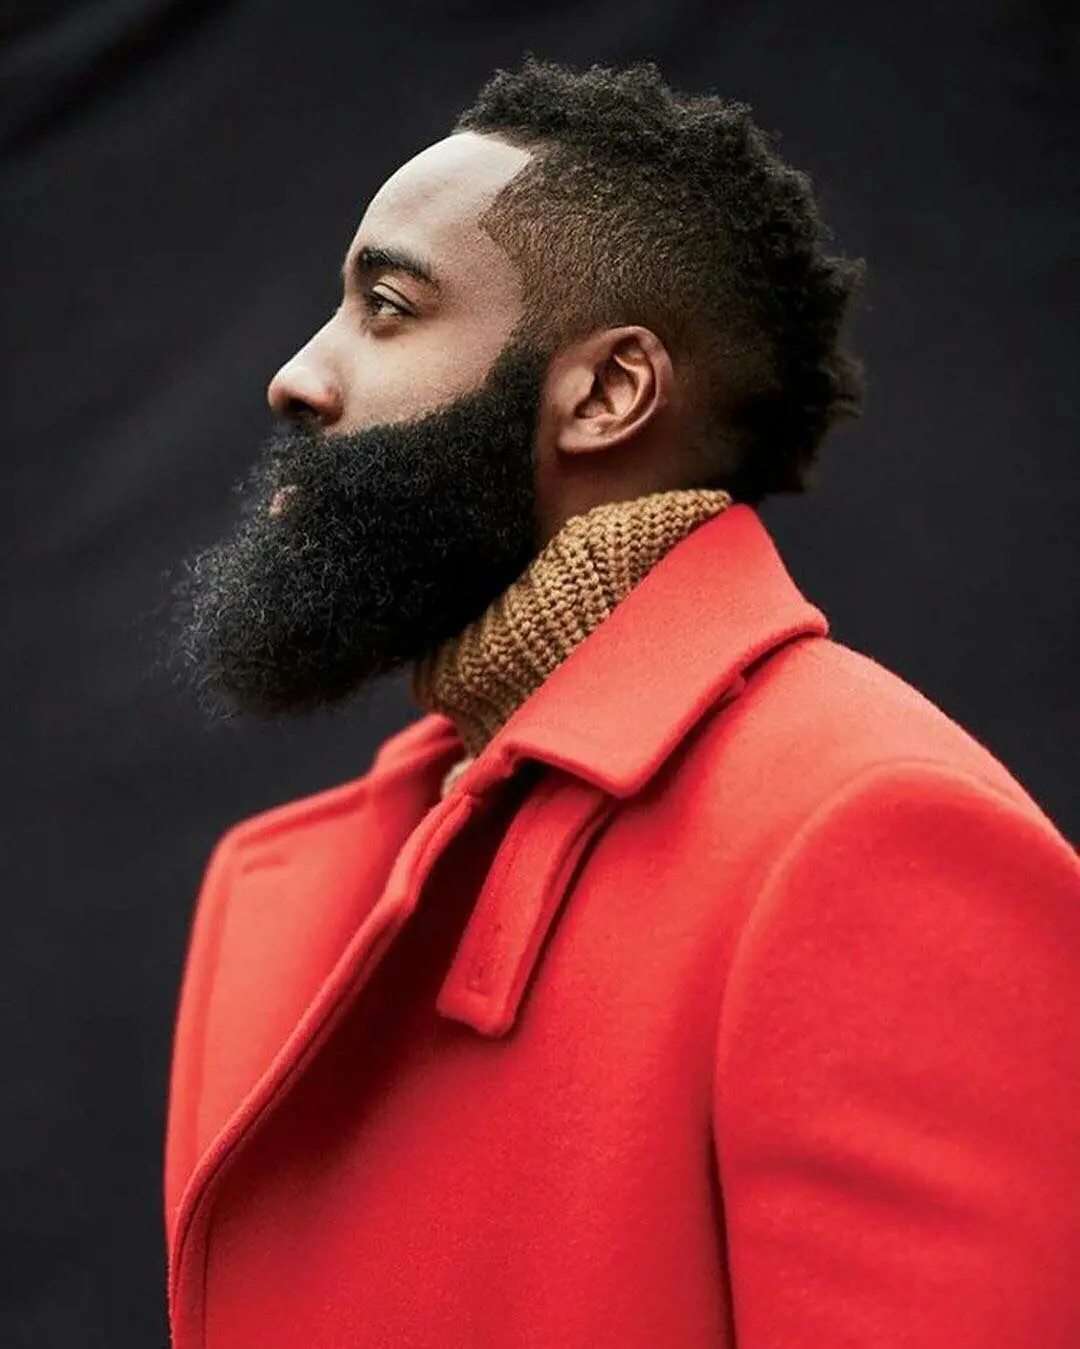 James Harden looks chic in a orange long coat and his iconic hirsute chin